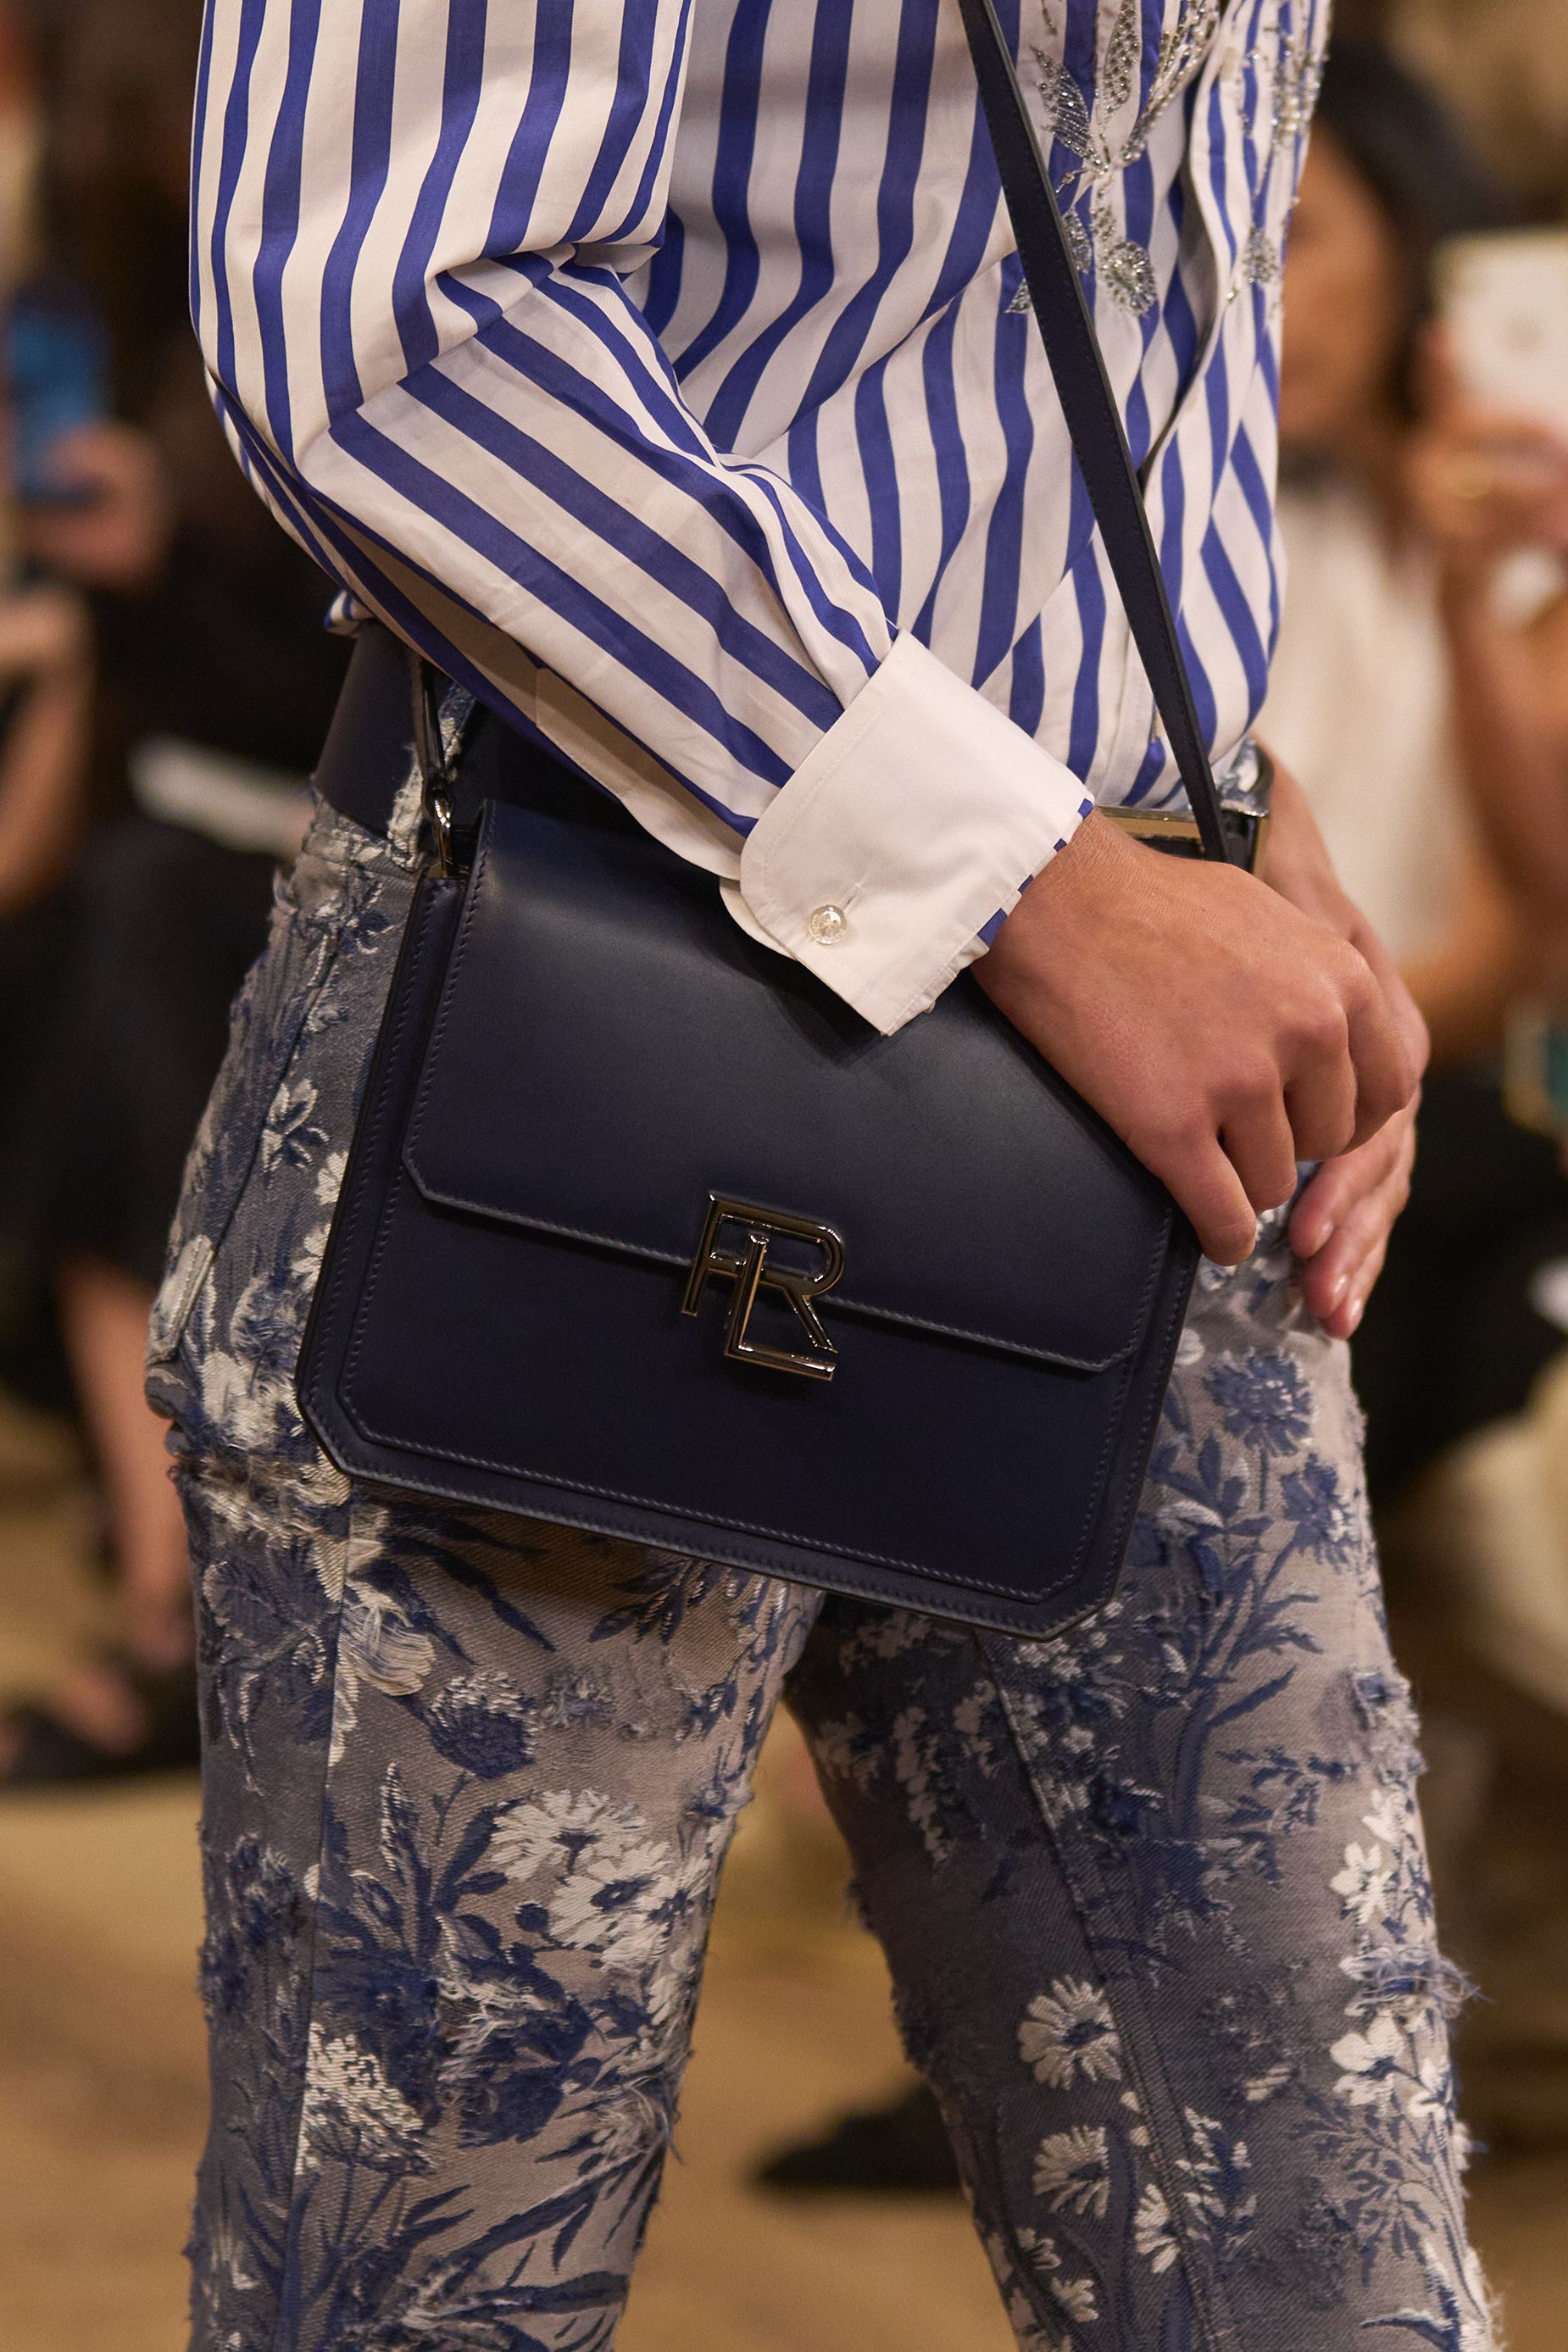 A detail shot from the collection highlights its floral detailing on denim pieces, and the brand's new RL 888 handbag.